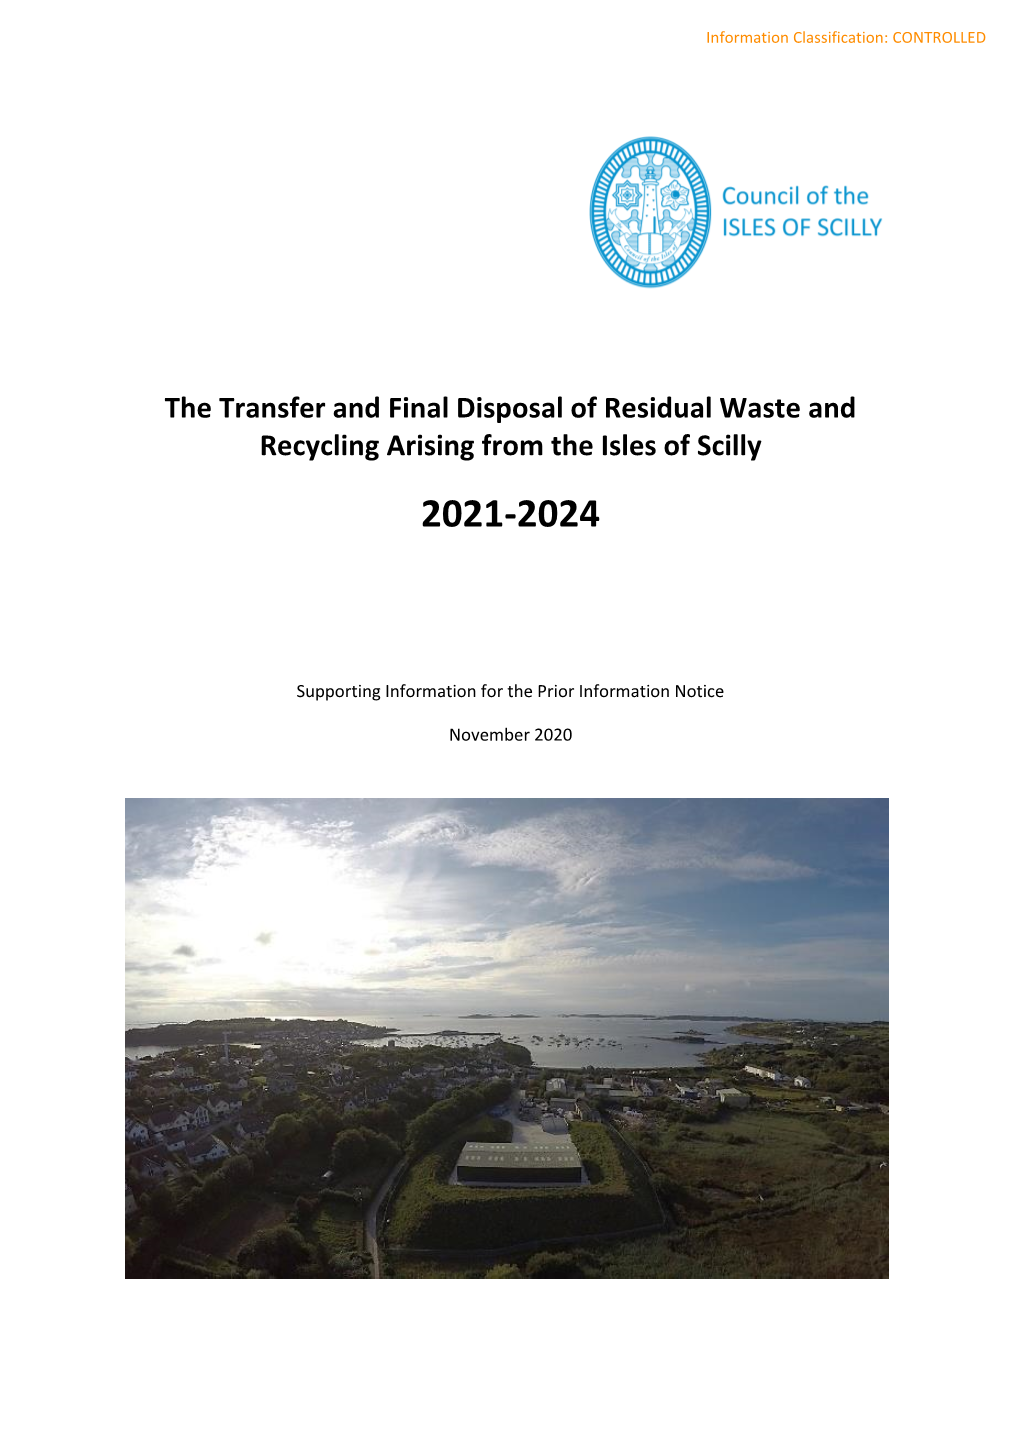 The Transfer and Final Disposal of Residual Waste and Recycling Arising from the Isles of Scilly 2021-2024